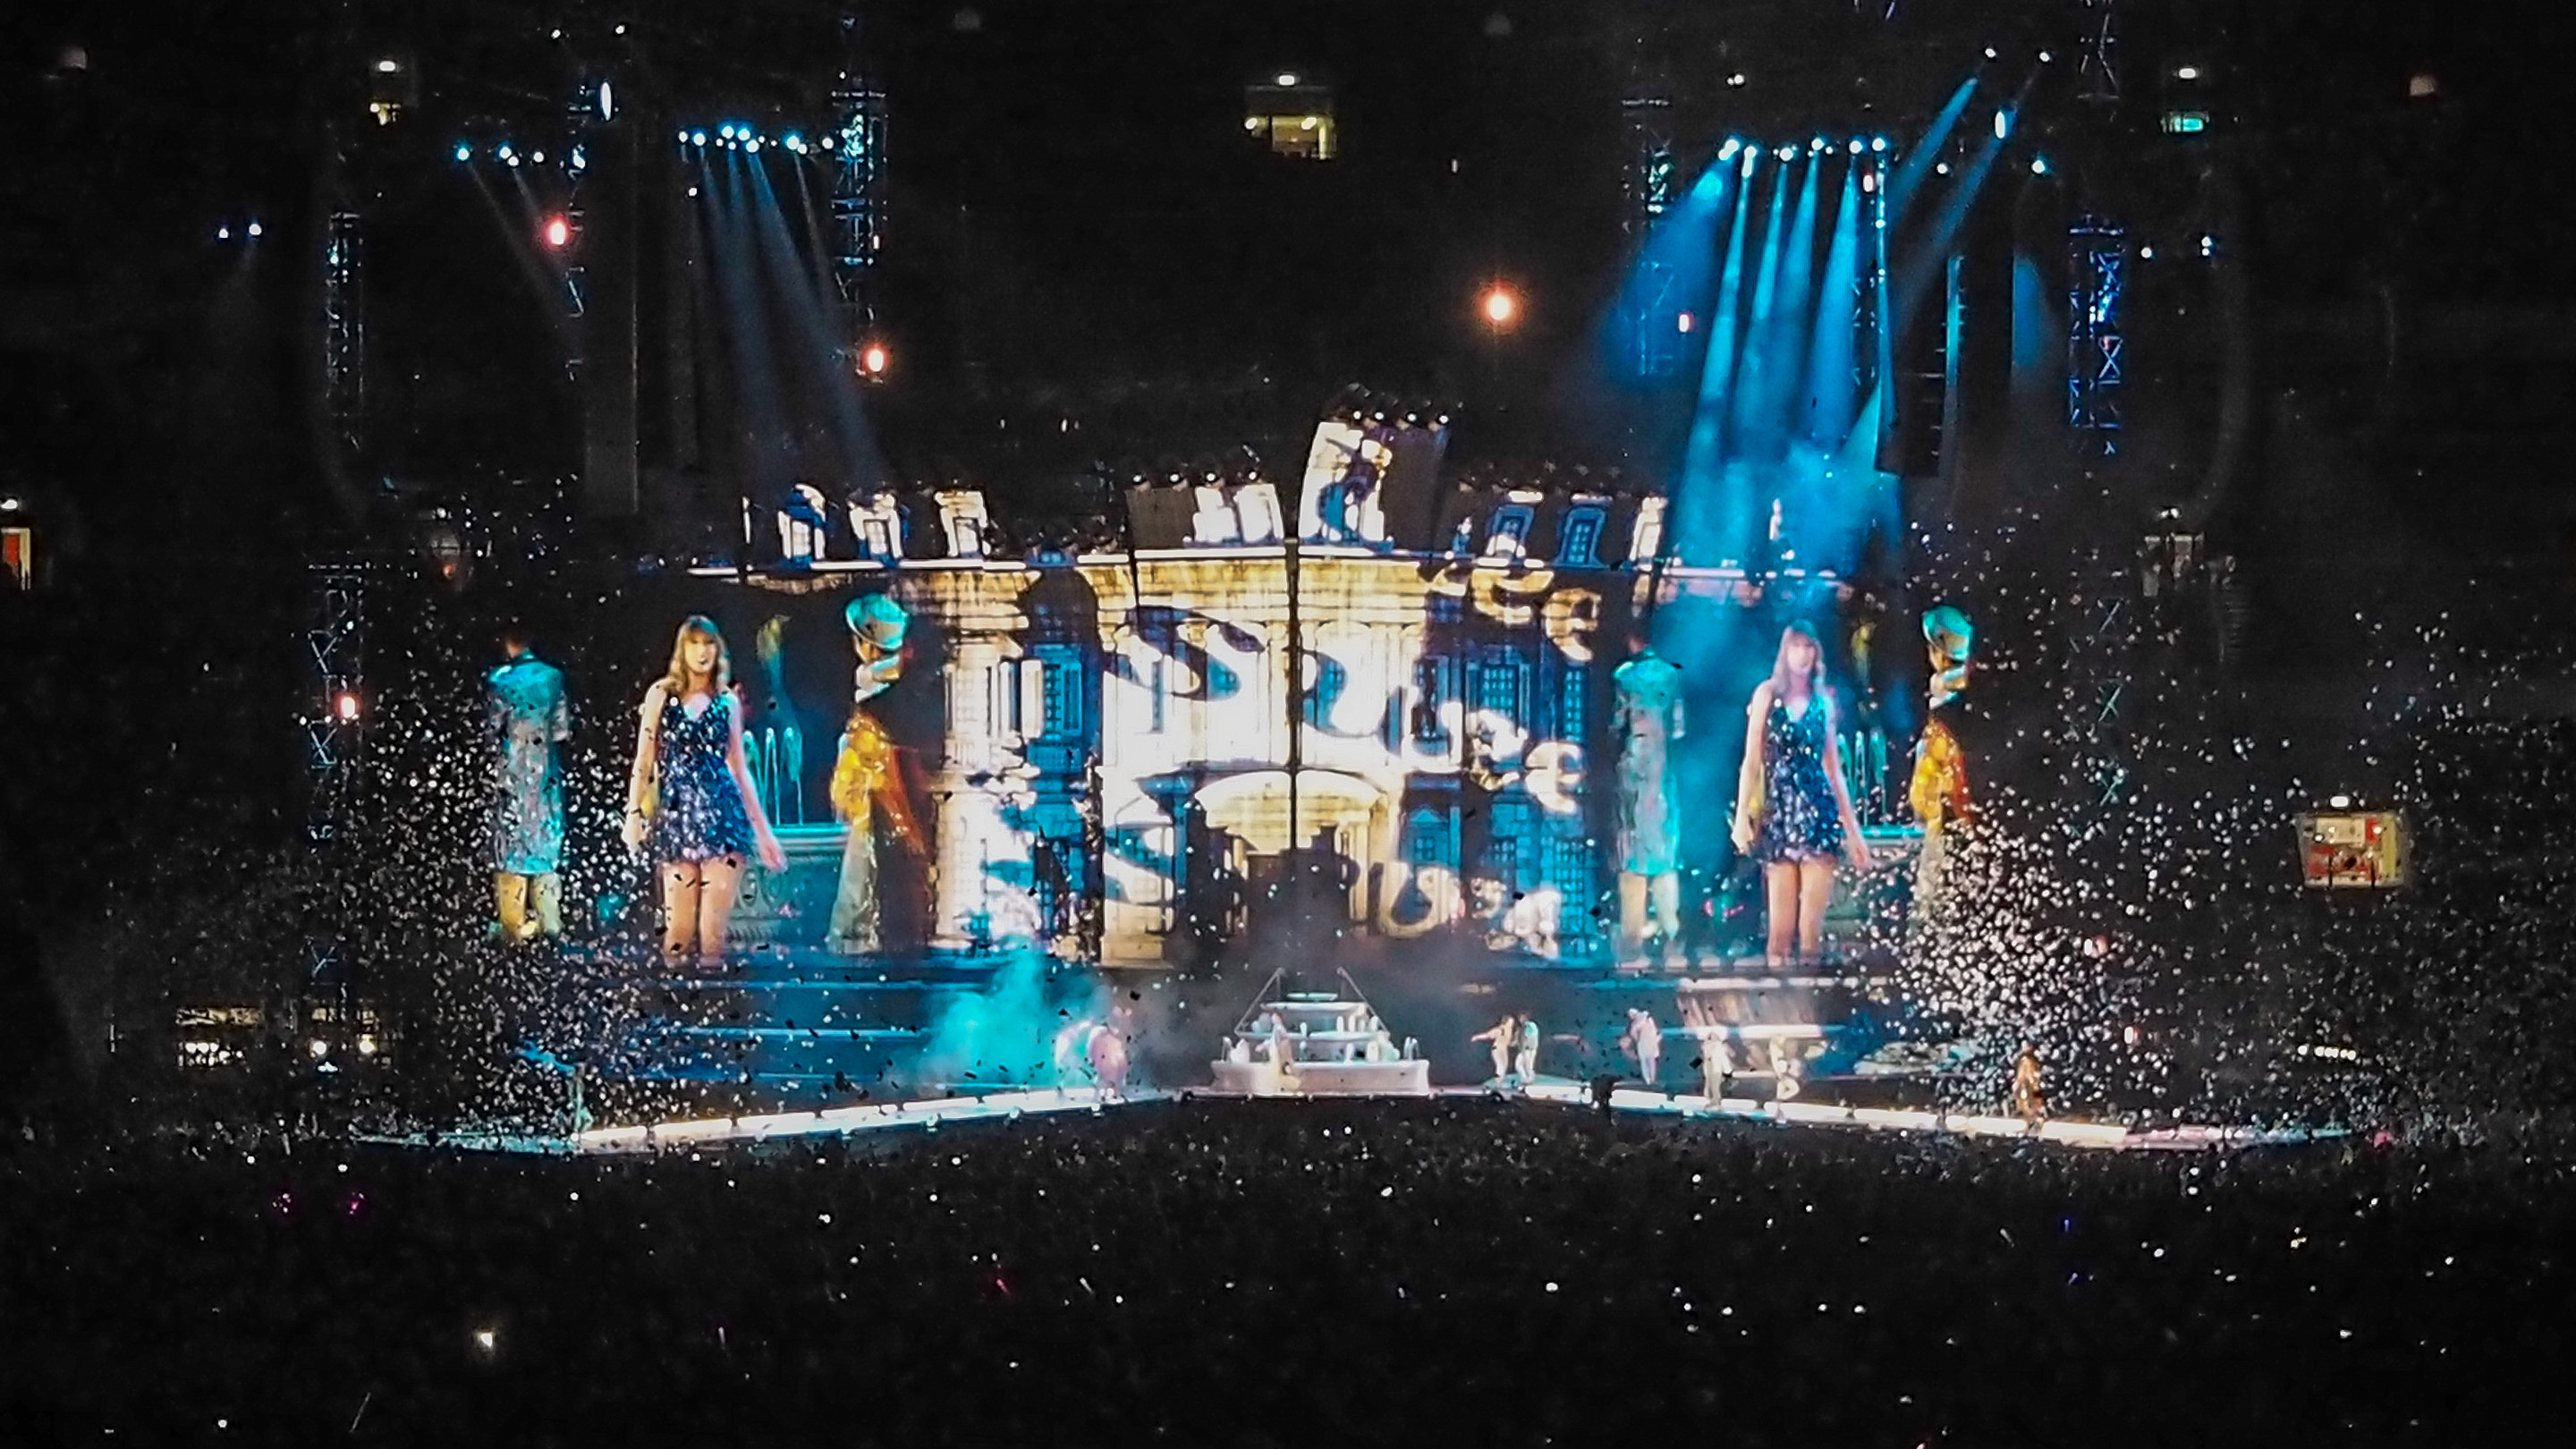 Taylor Swift's Reputation Stadium Tour London 2018. Wembley Stadium Stage, This Is Why We Can't Have Nice Things Tour Closer